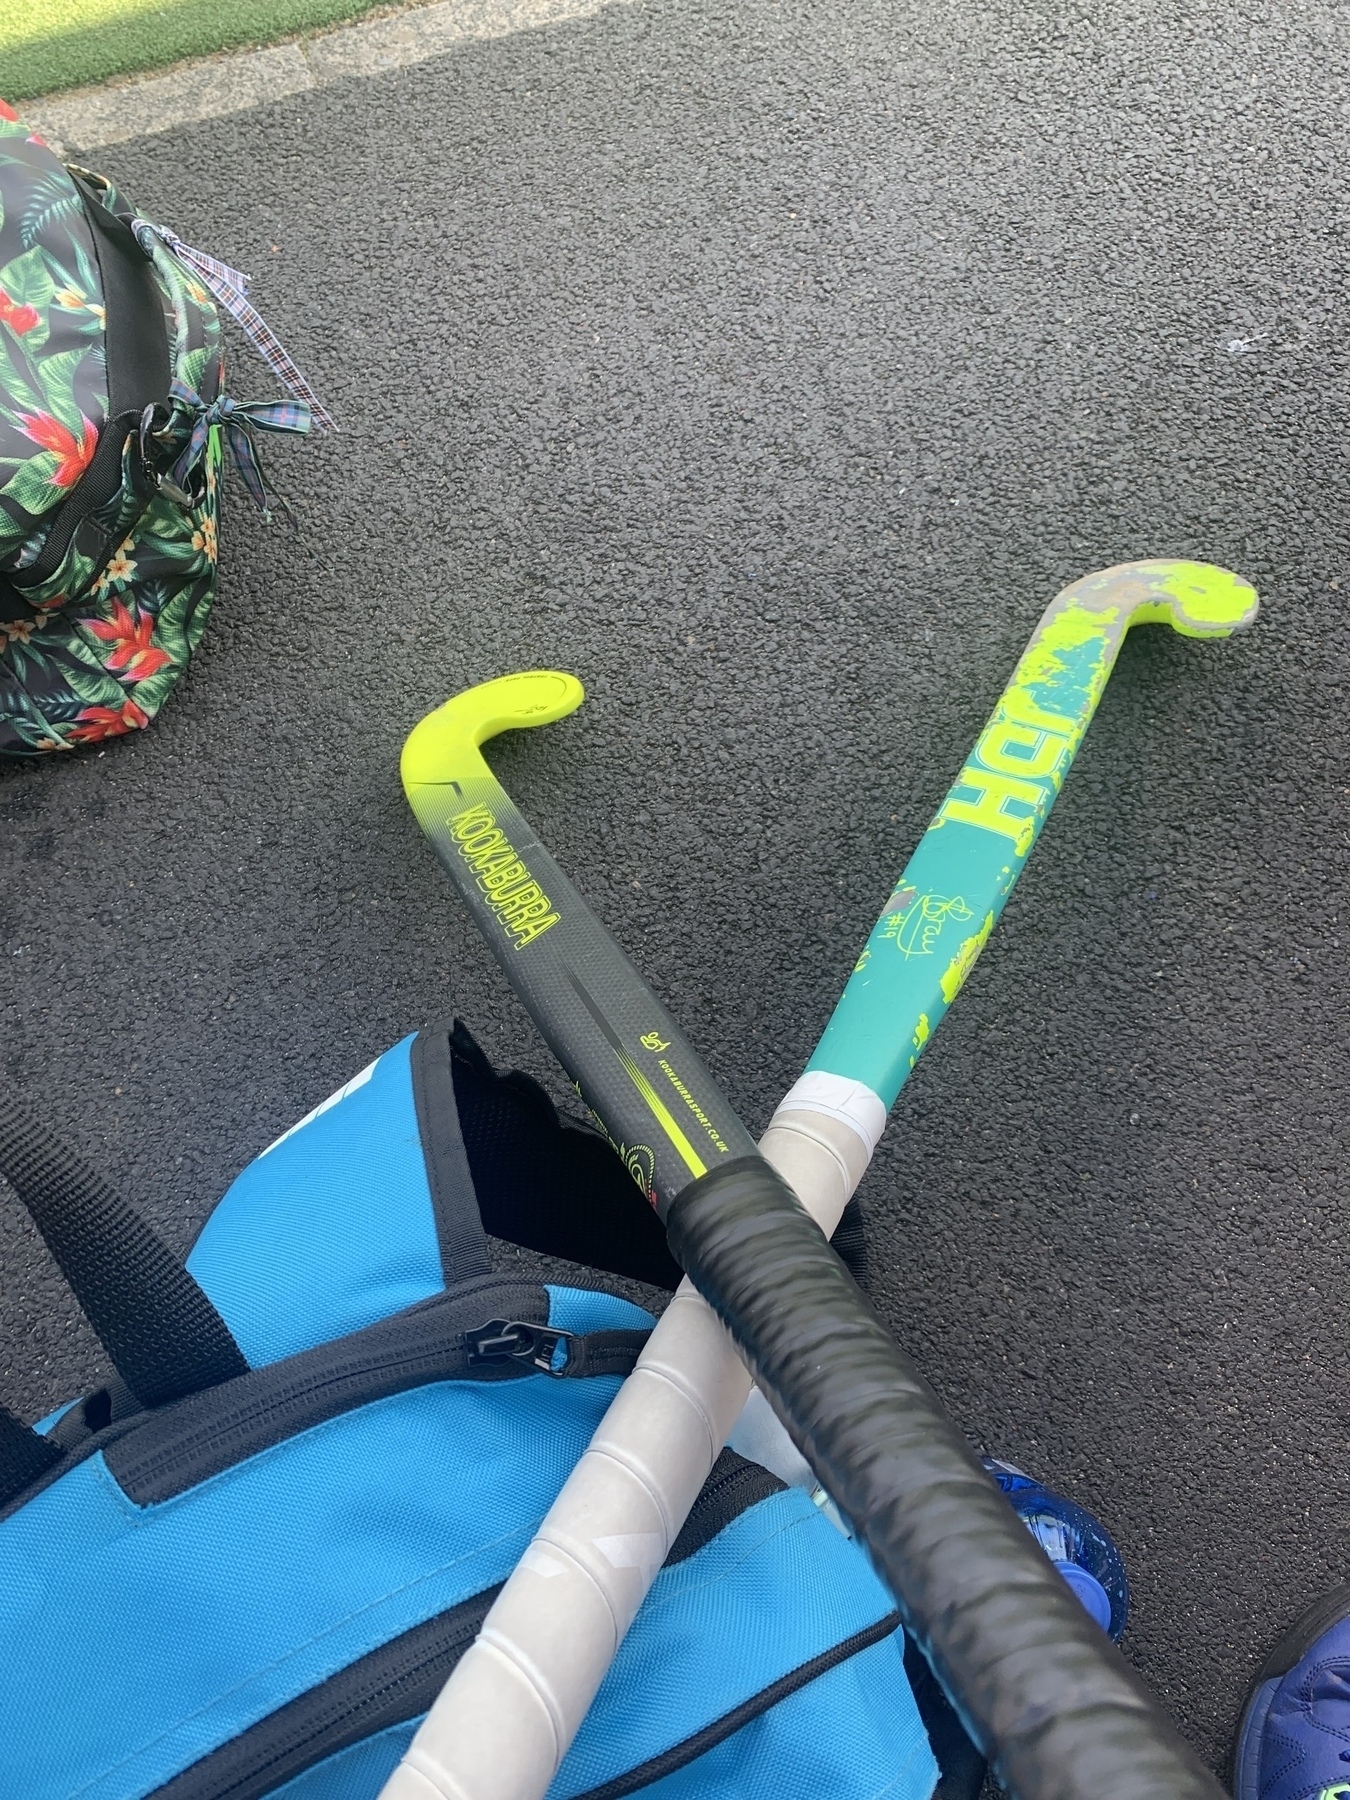 Two crossed field hockey sticks resting on a blue bag at the side of the pitch.